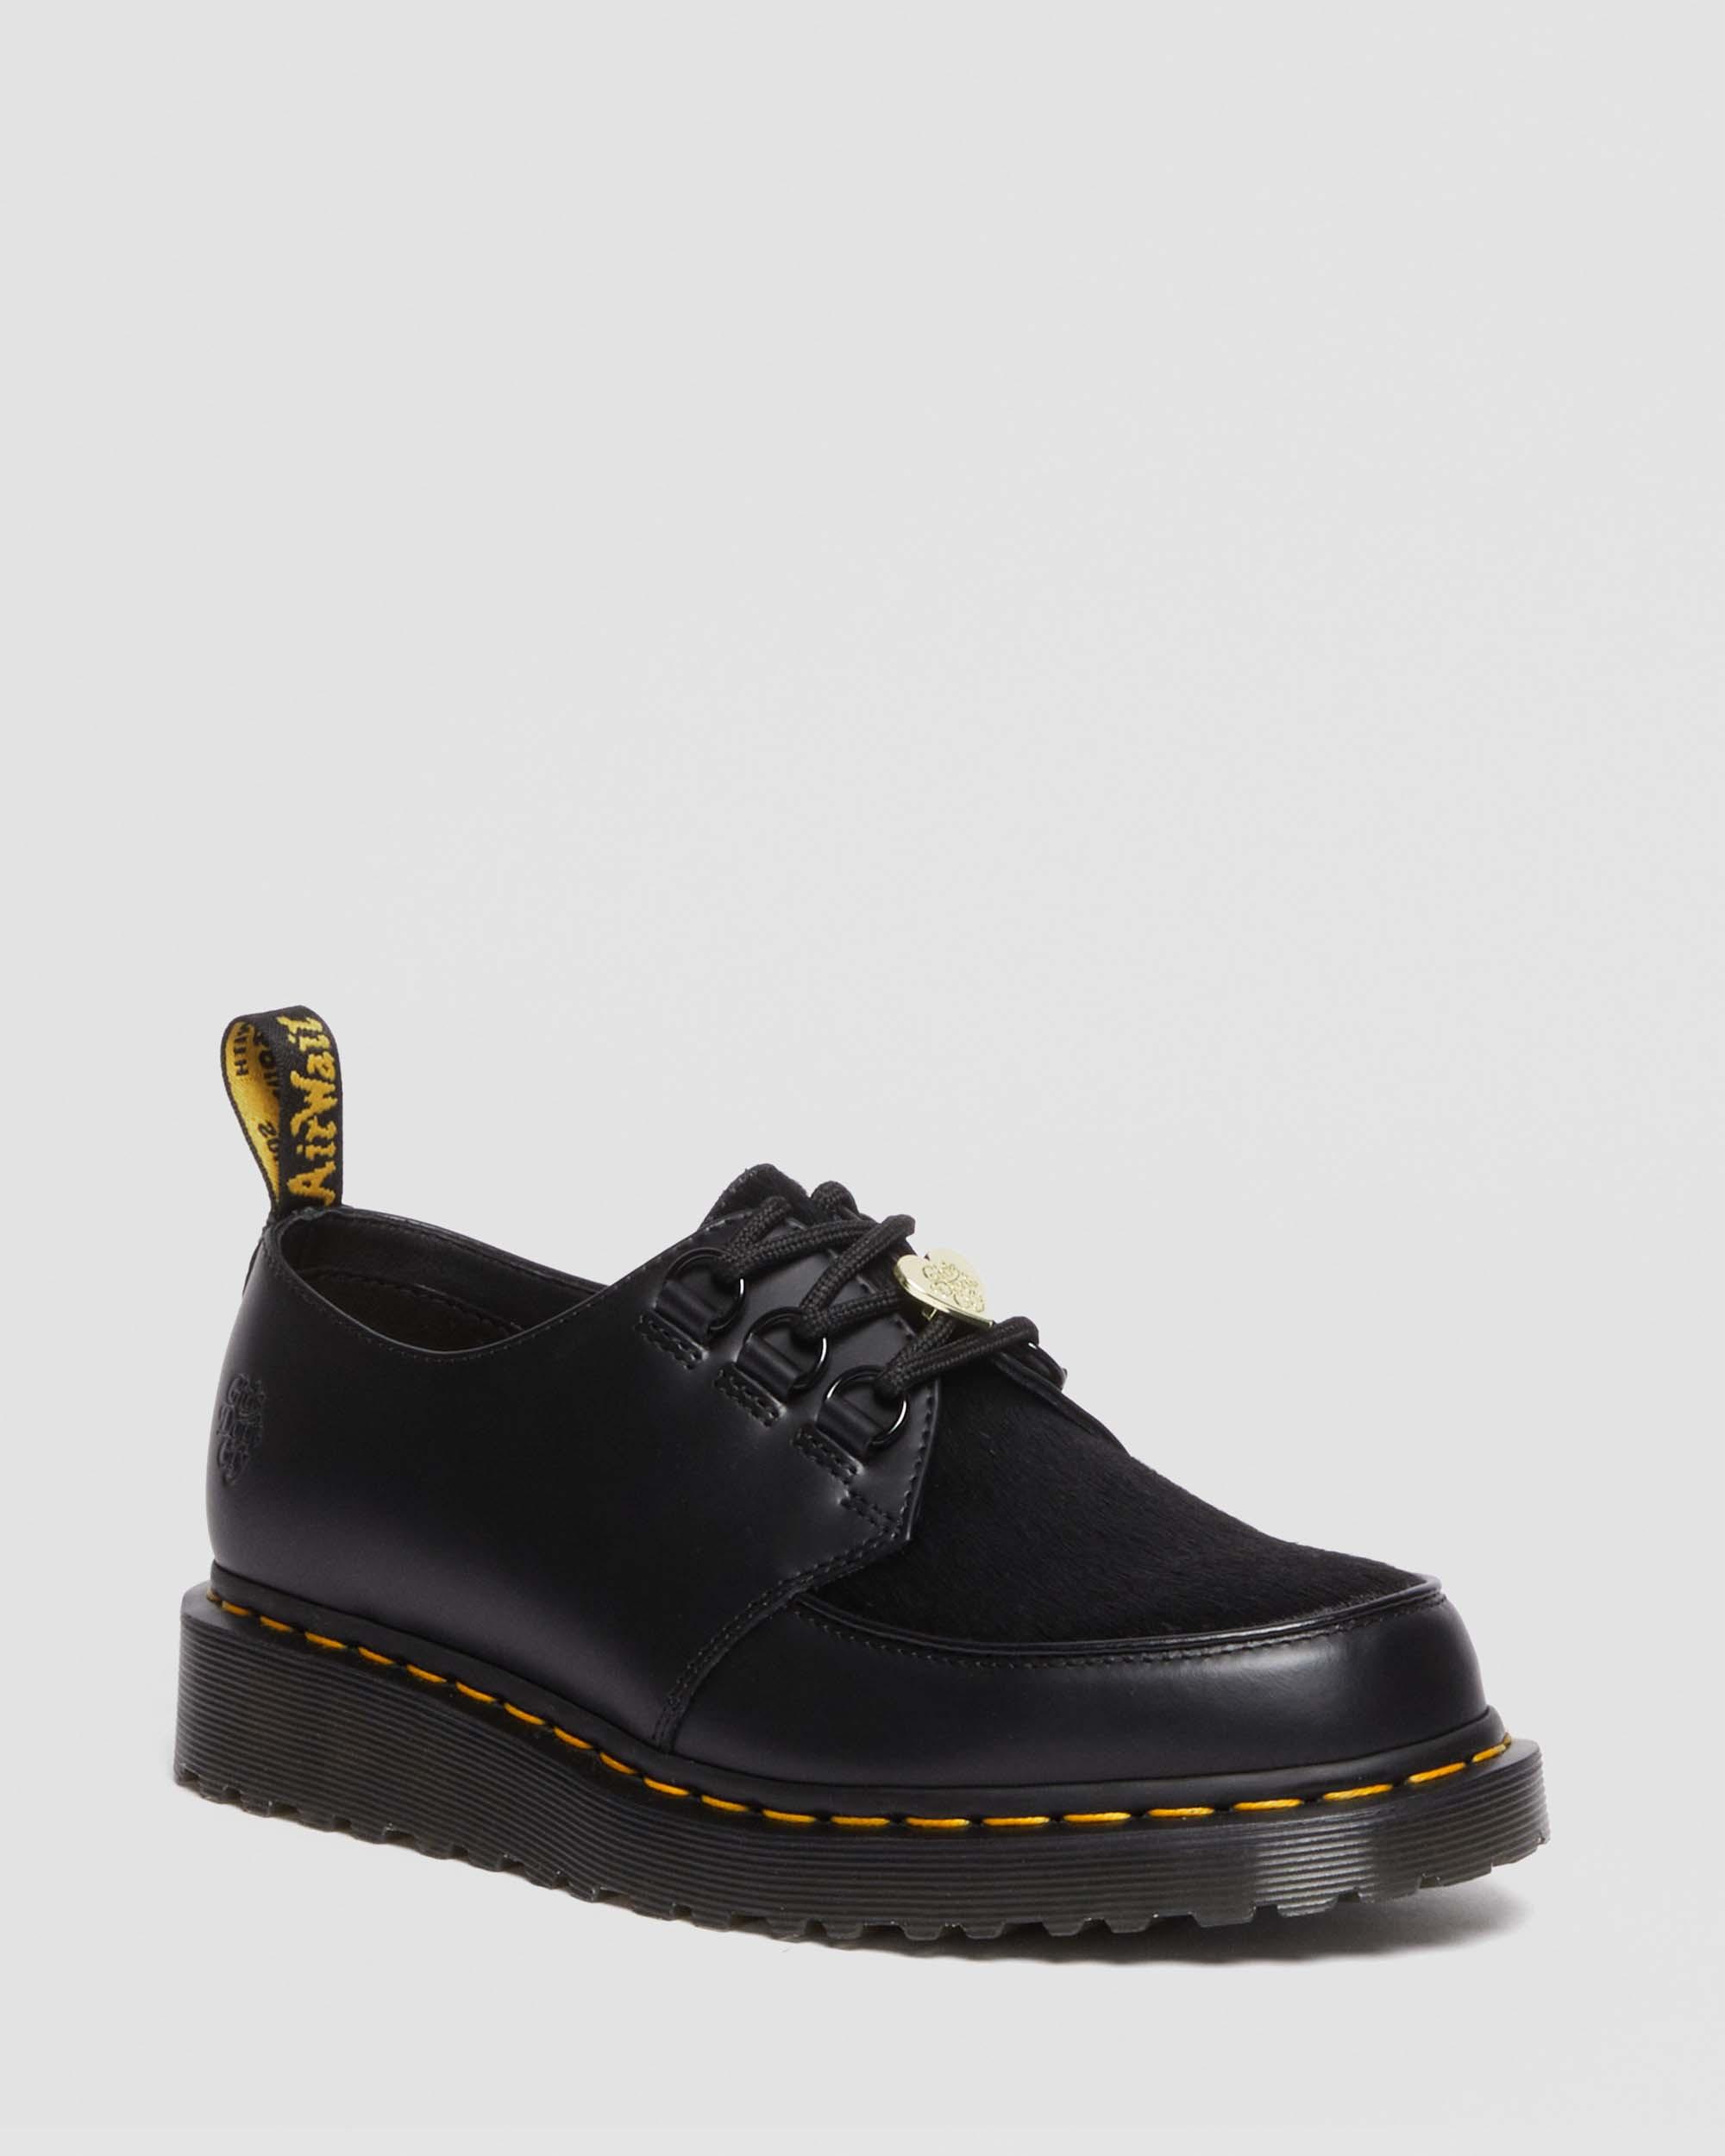 GDCGirls Don’t Cry × Dr.Martens